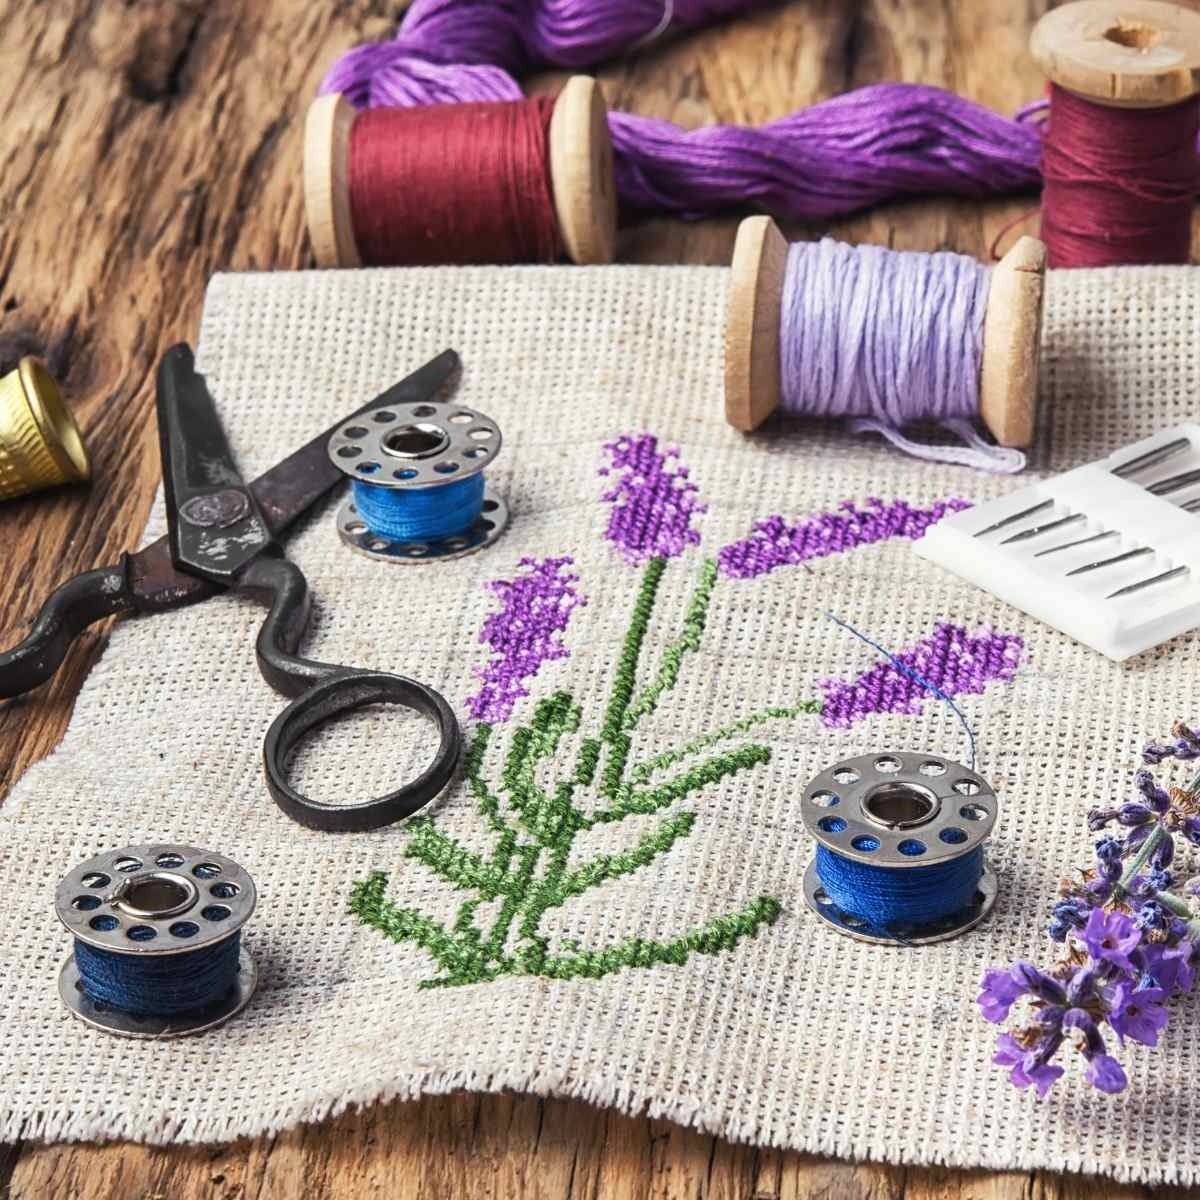 Lavender clothing embroidery